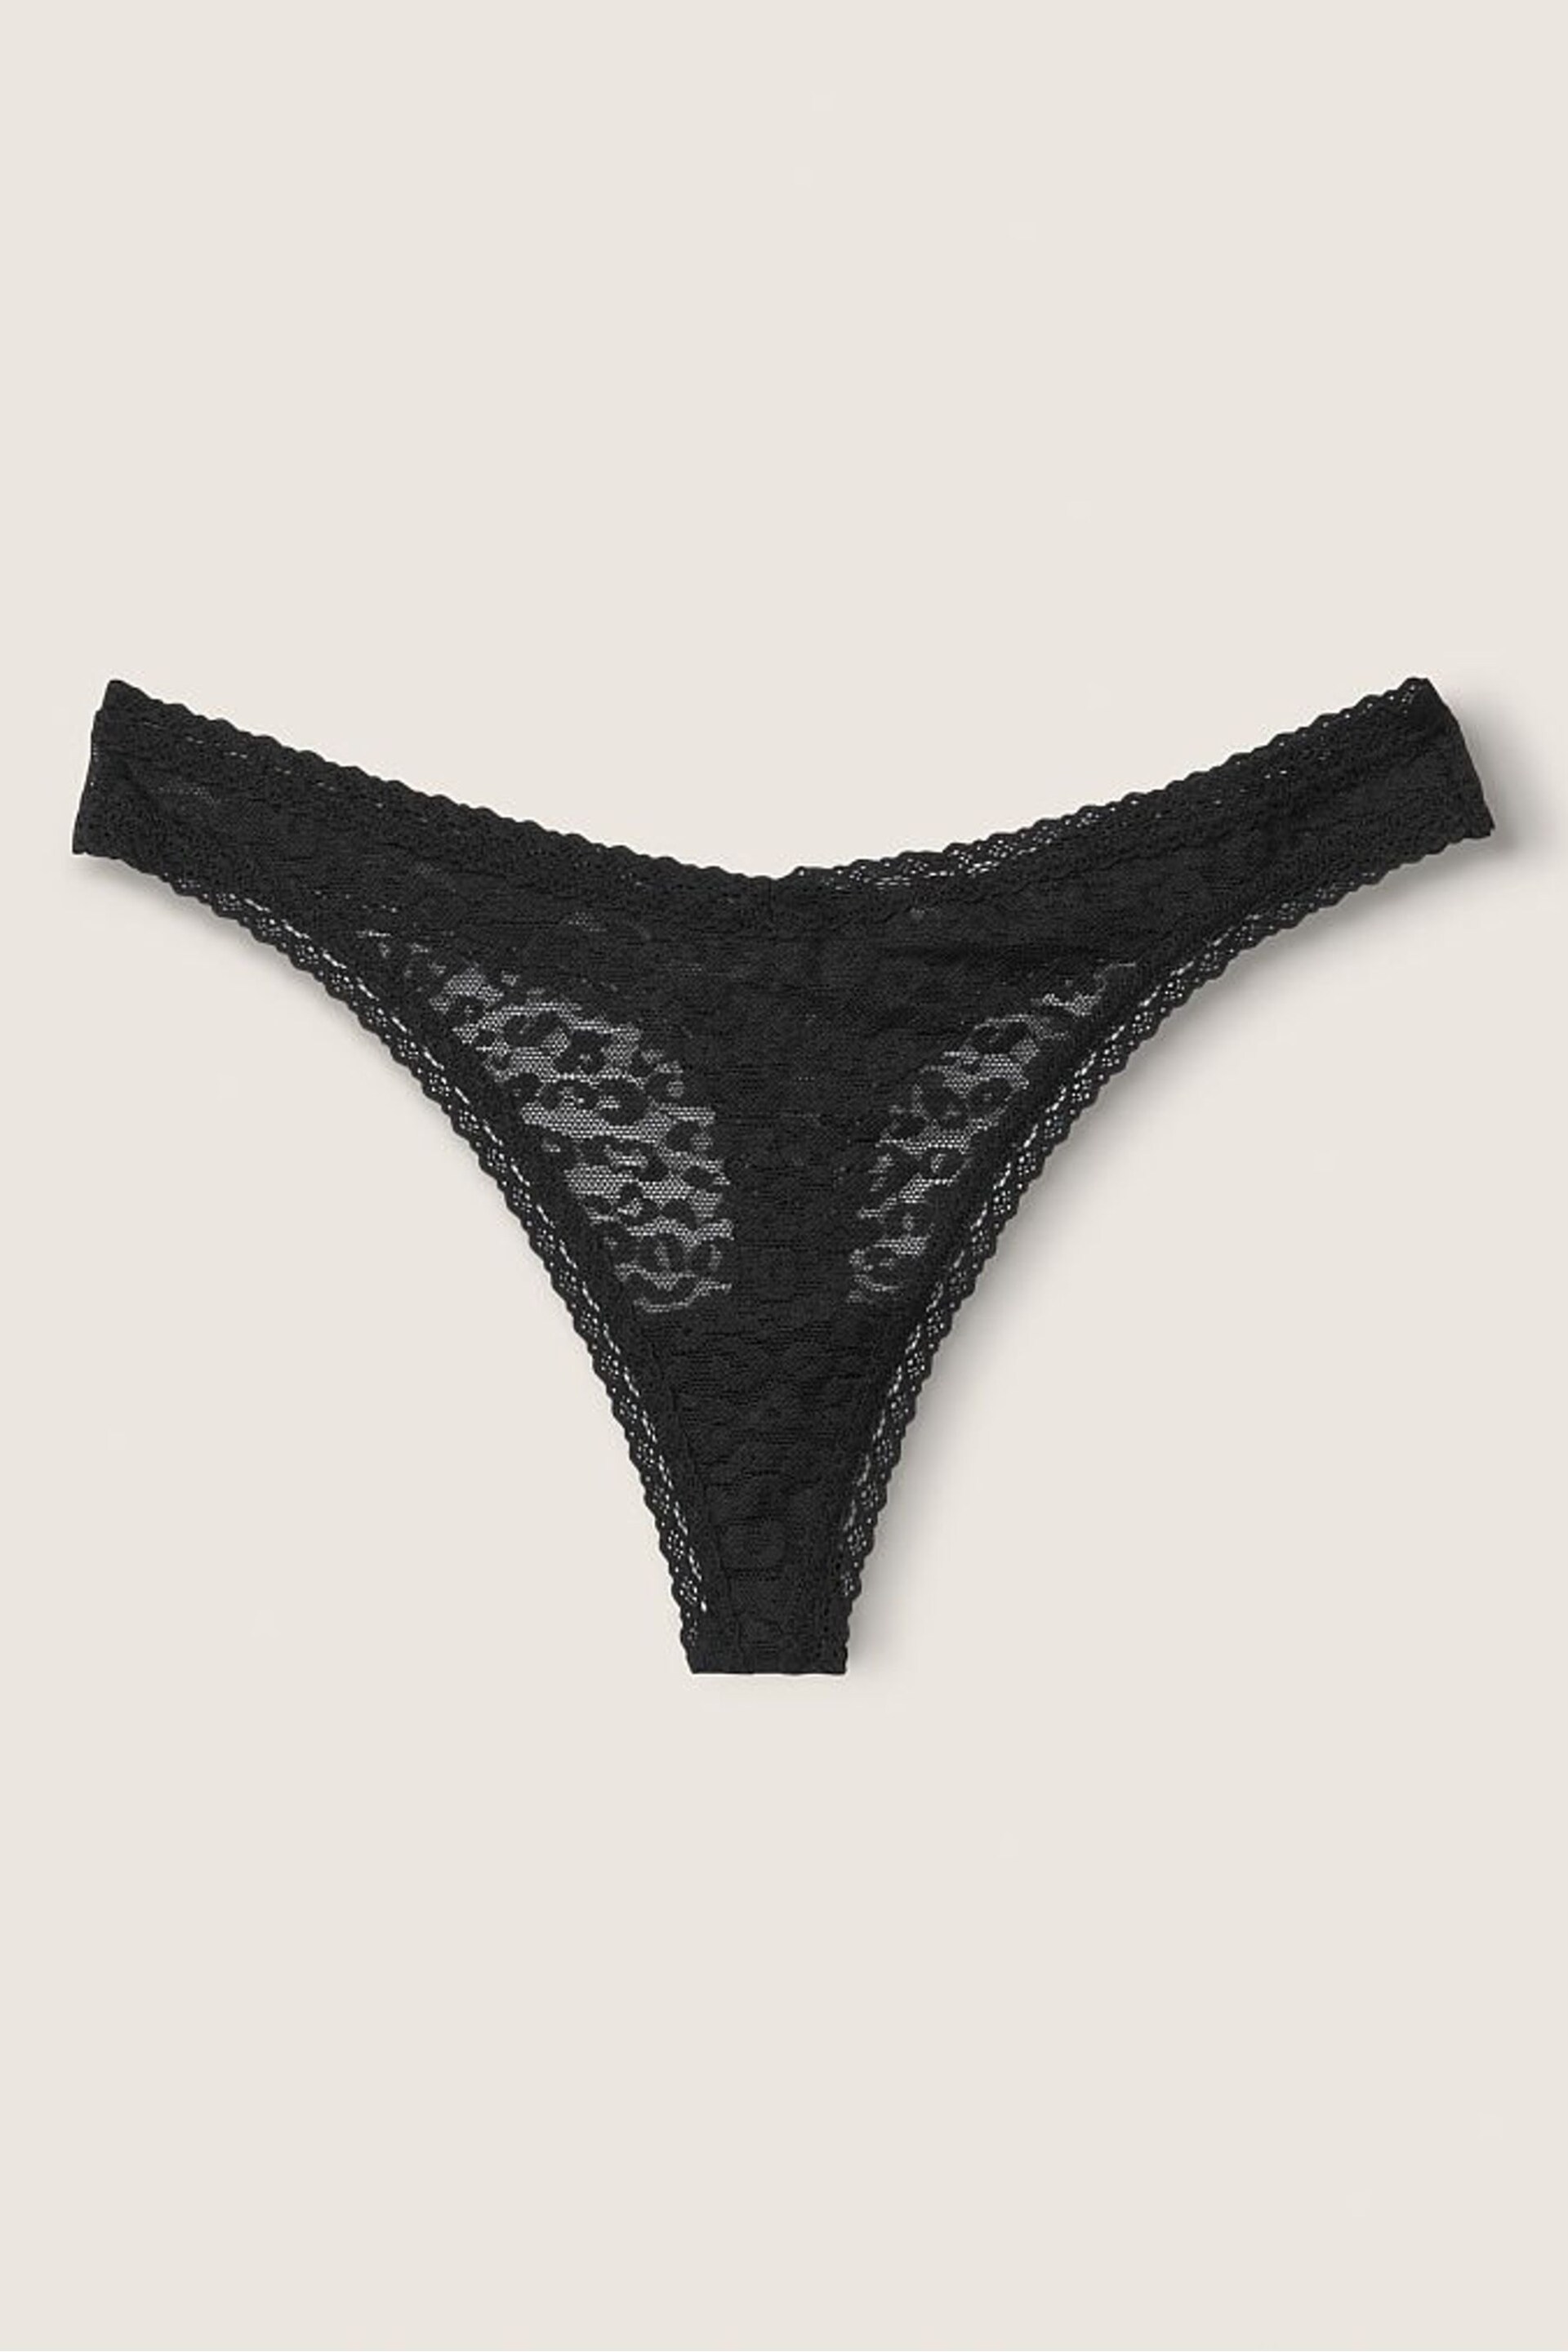 Victoria's Secret PINK Black Lace Logo Thong Knickers - Image 1 of 1